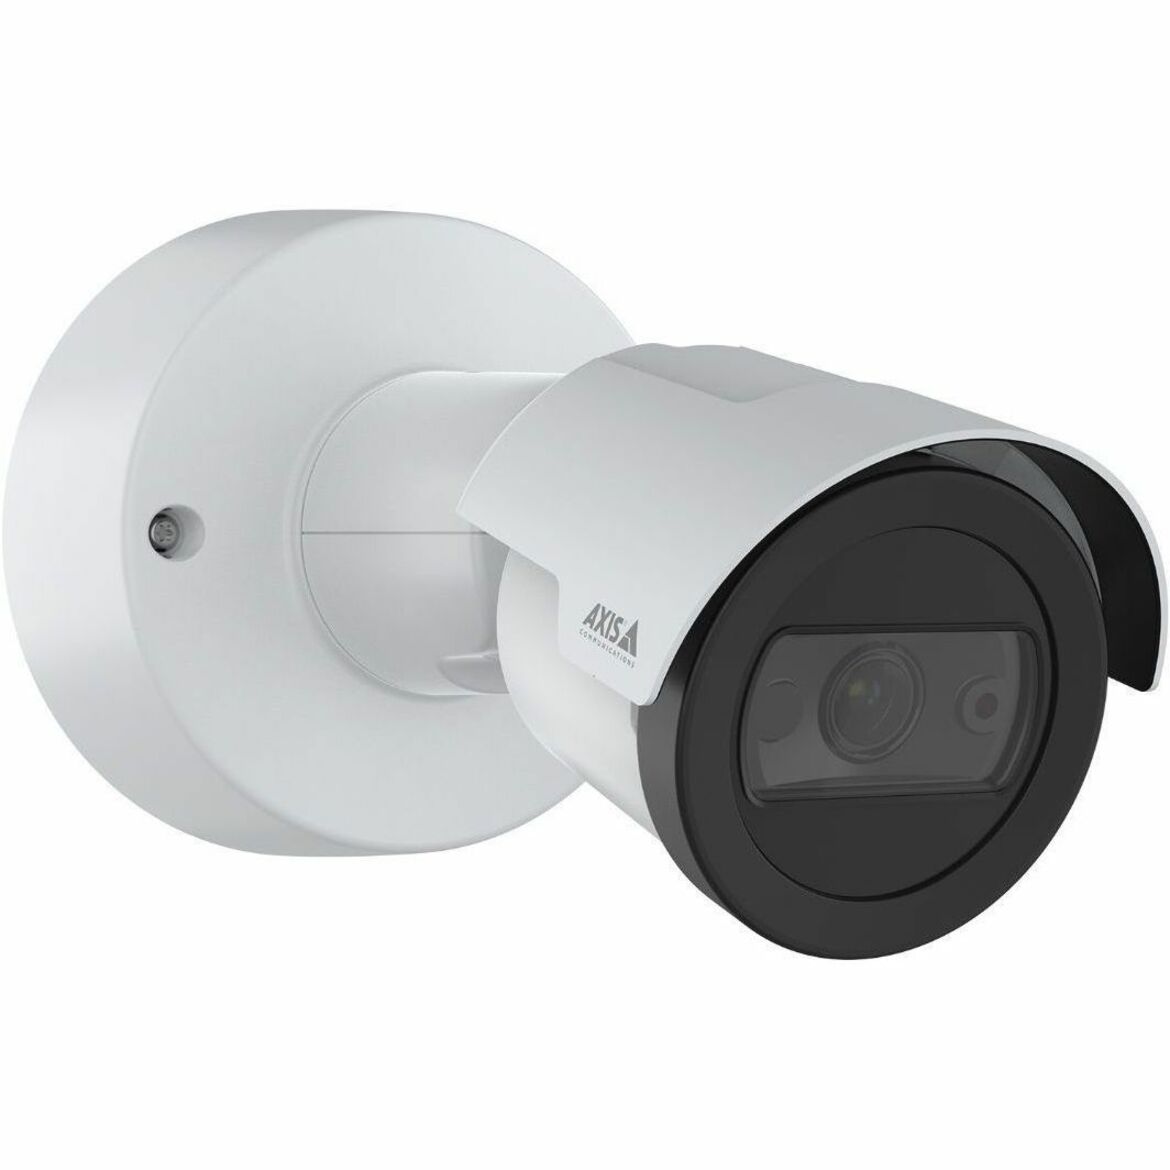 AXIS 02125-001 M2036-LE Network Camera, Motion Detection, Day/Night, Remote Management